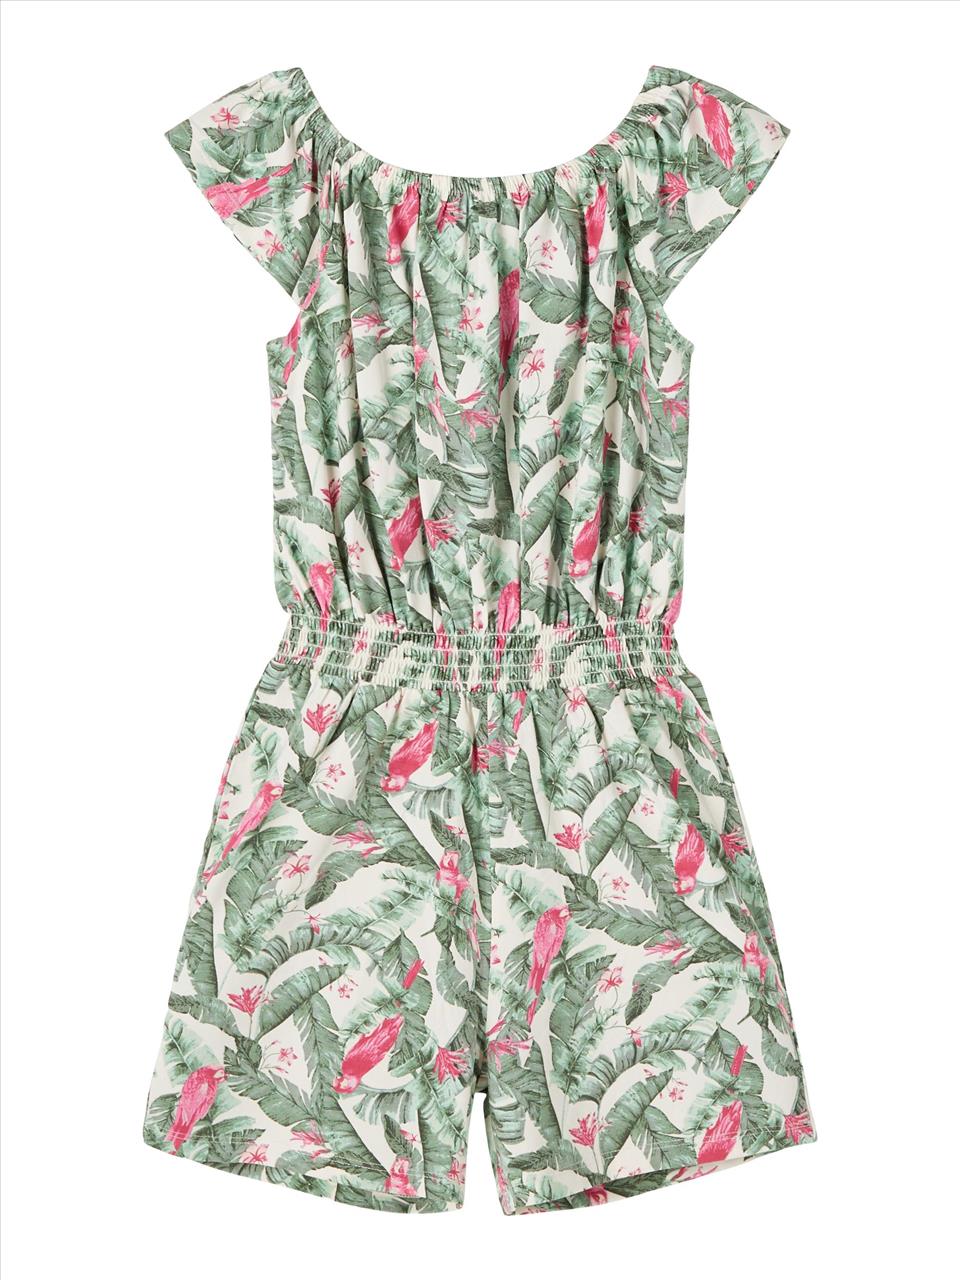 PLAYSUIT SHORT TROPICAL NAME IT S8-14